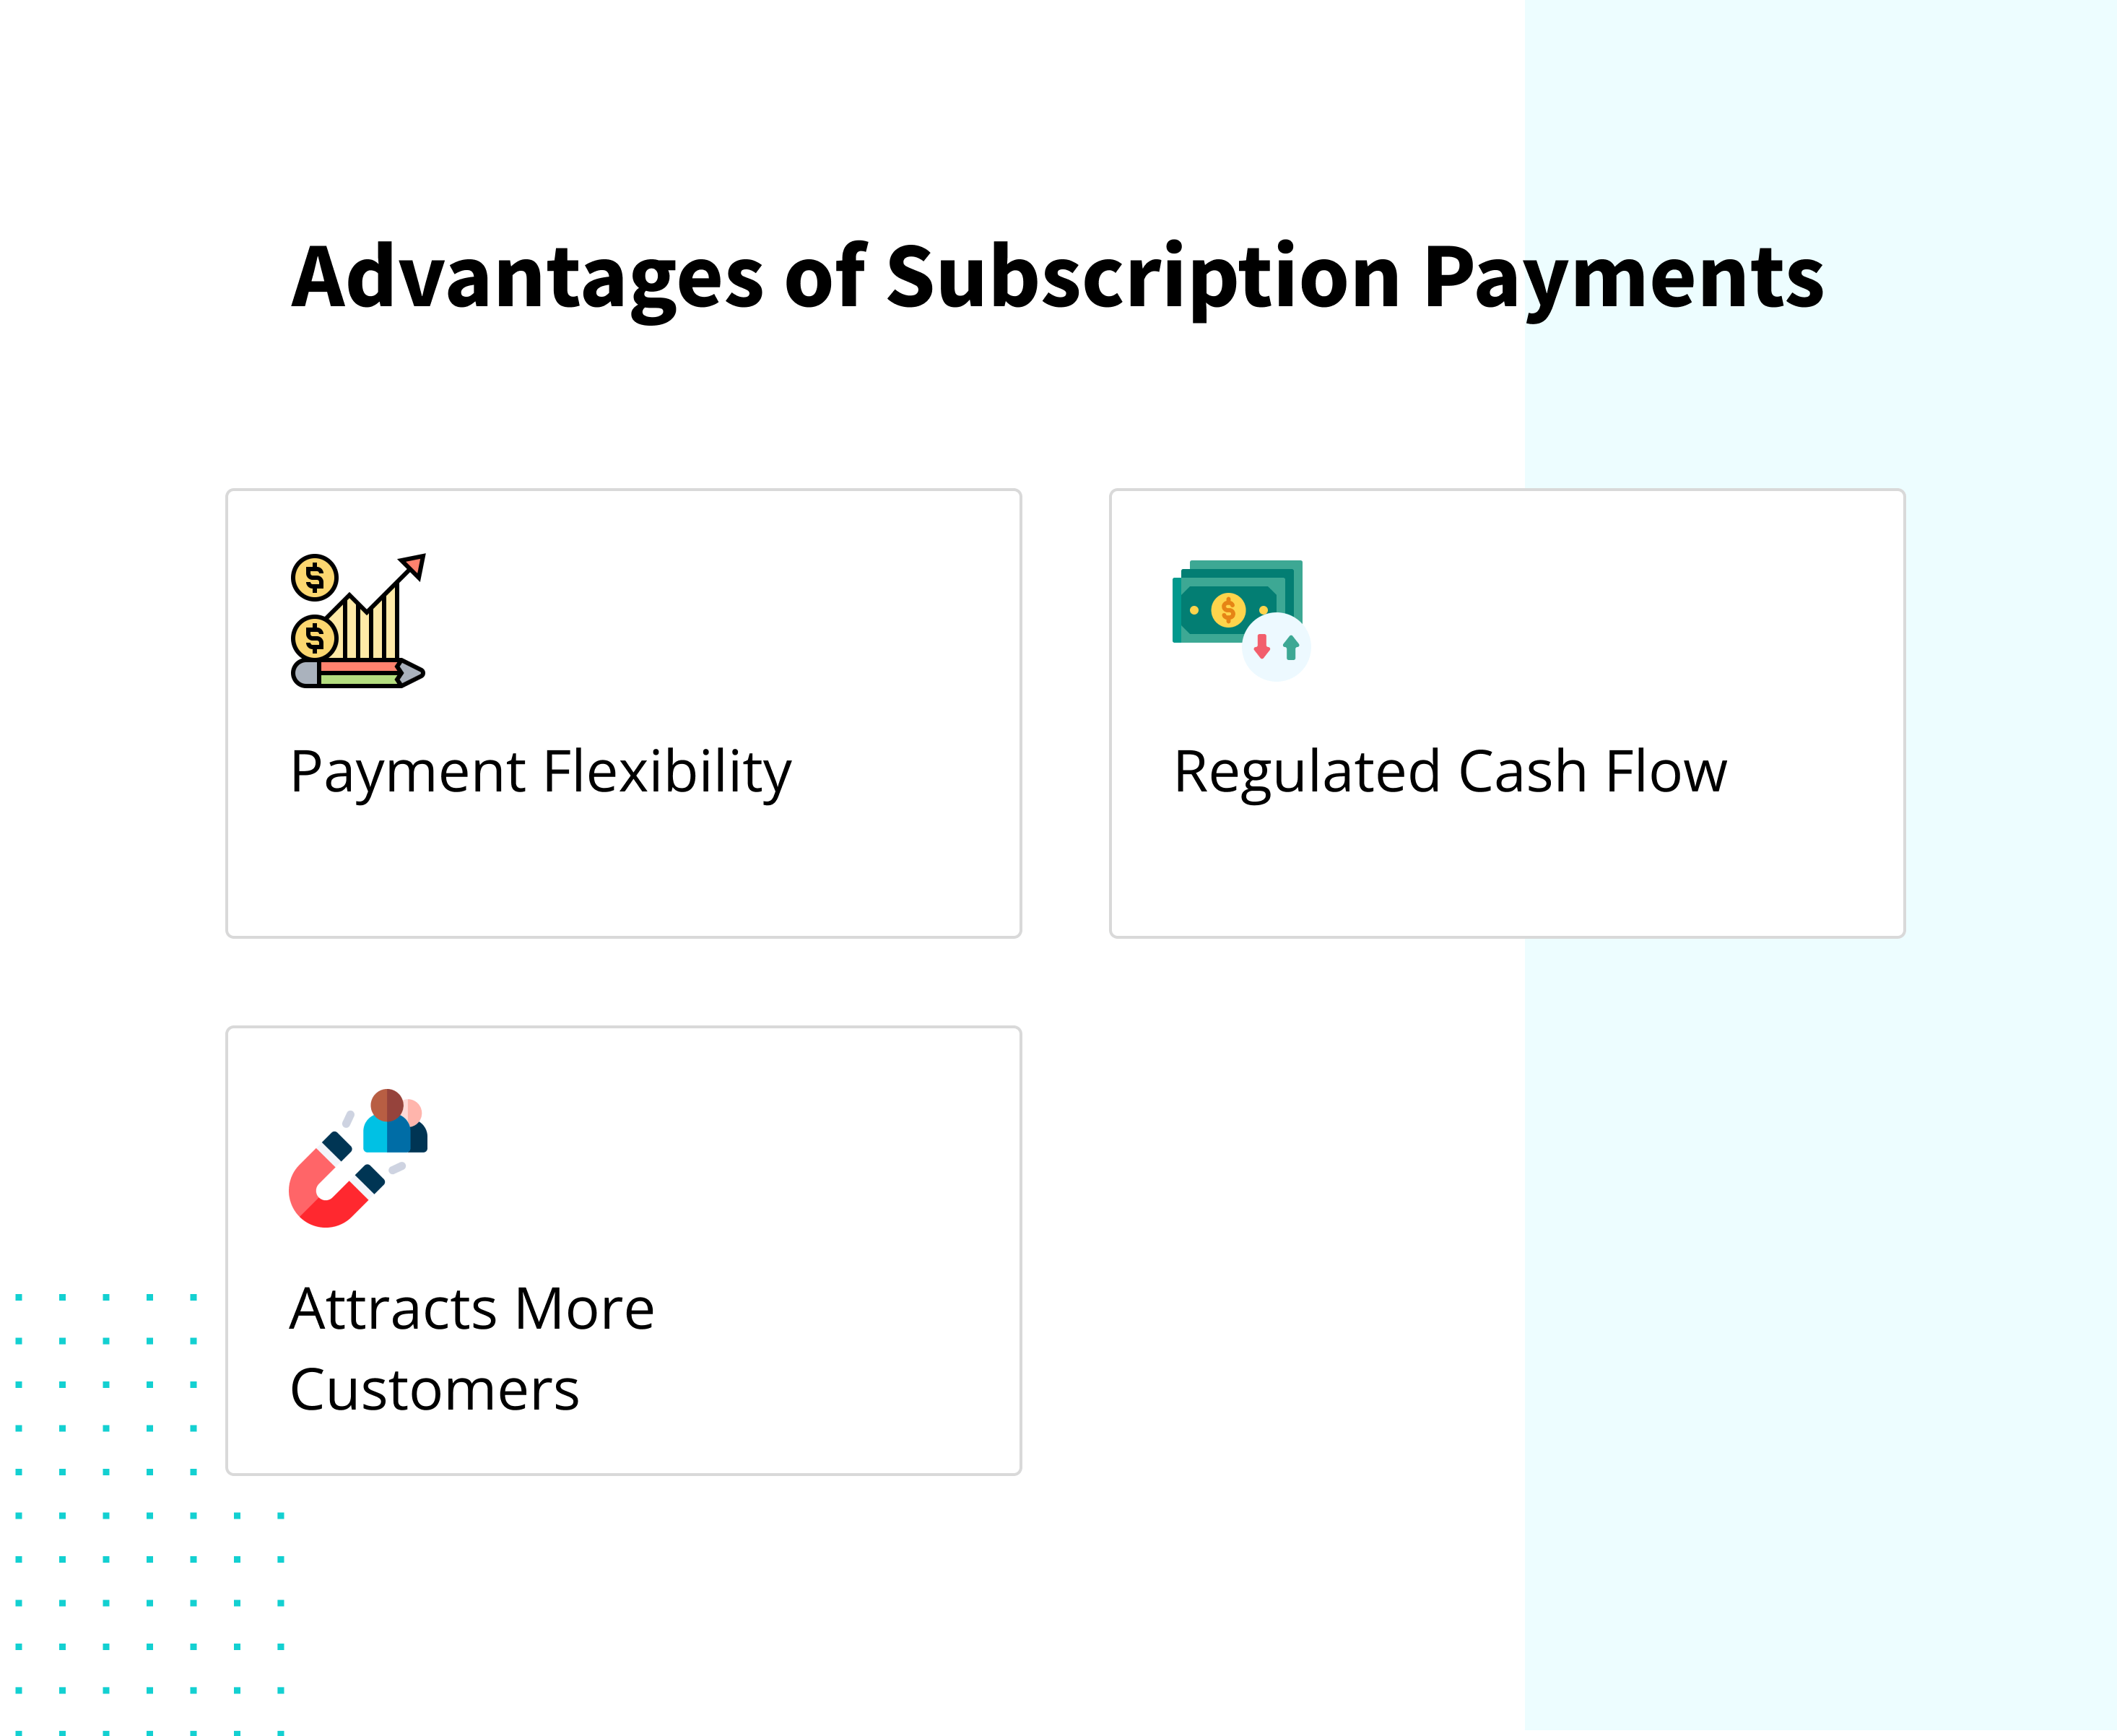 Advantages of a Subscription Payment System